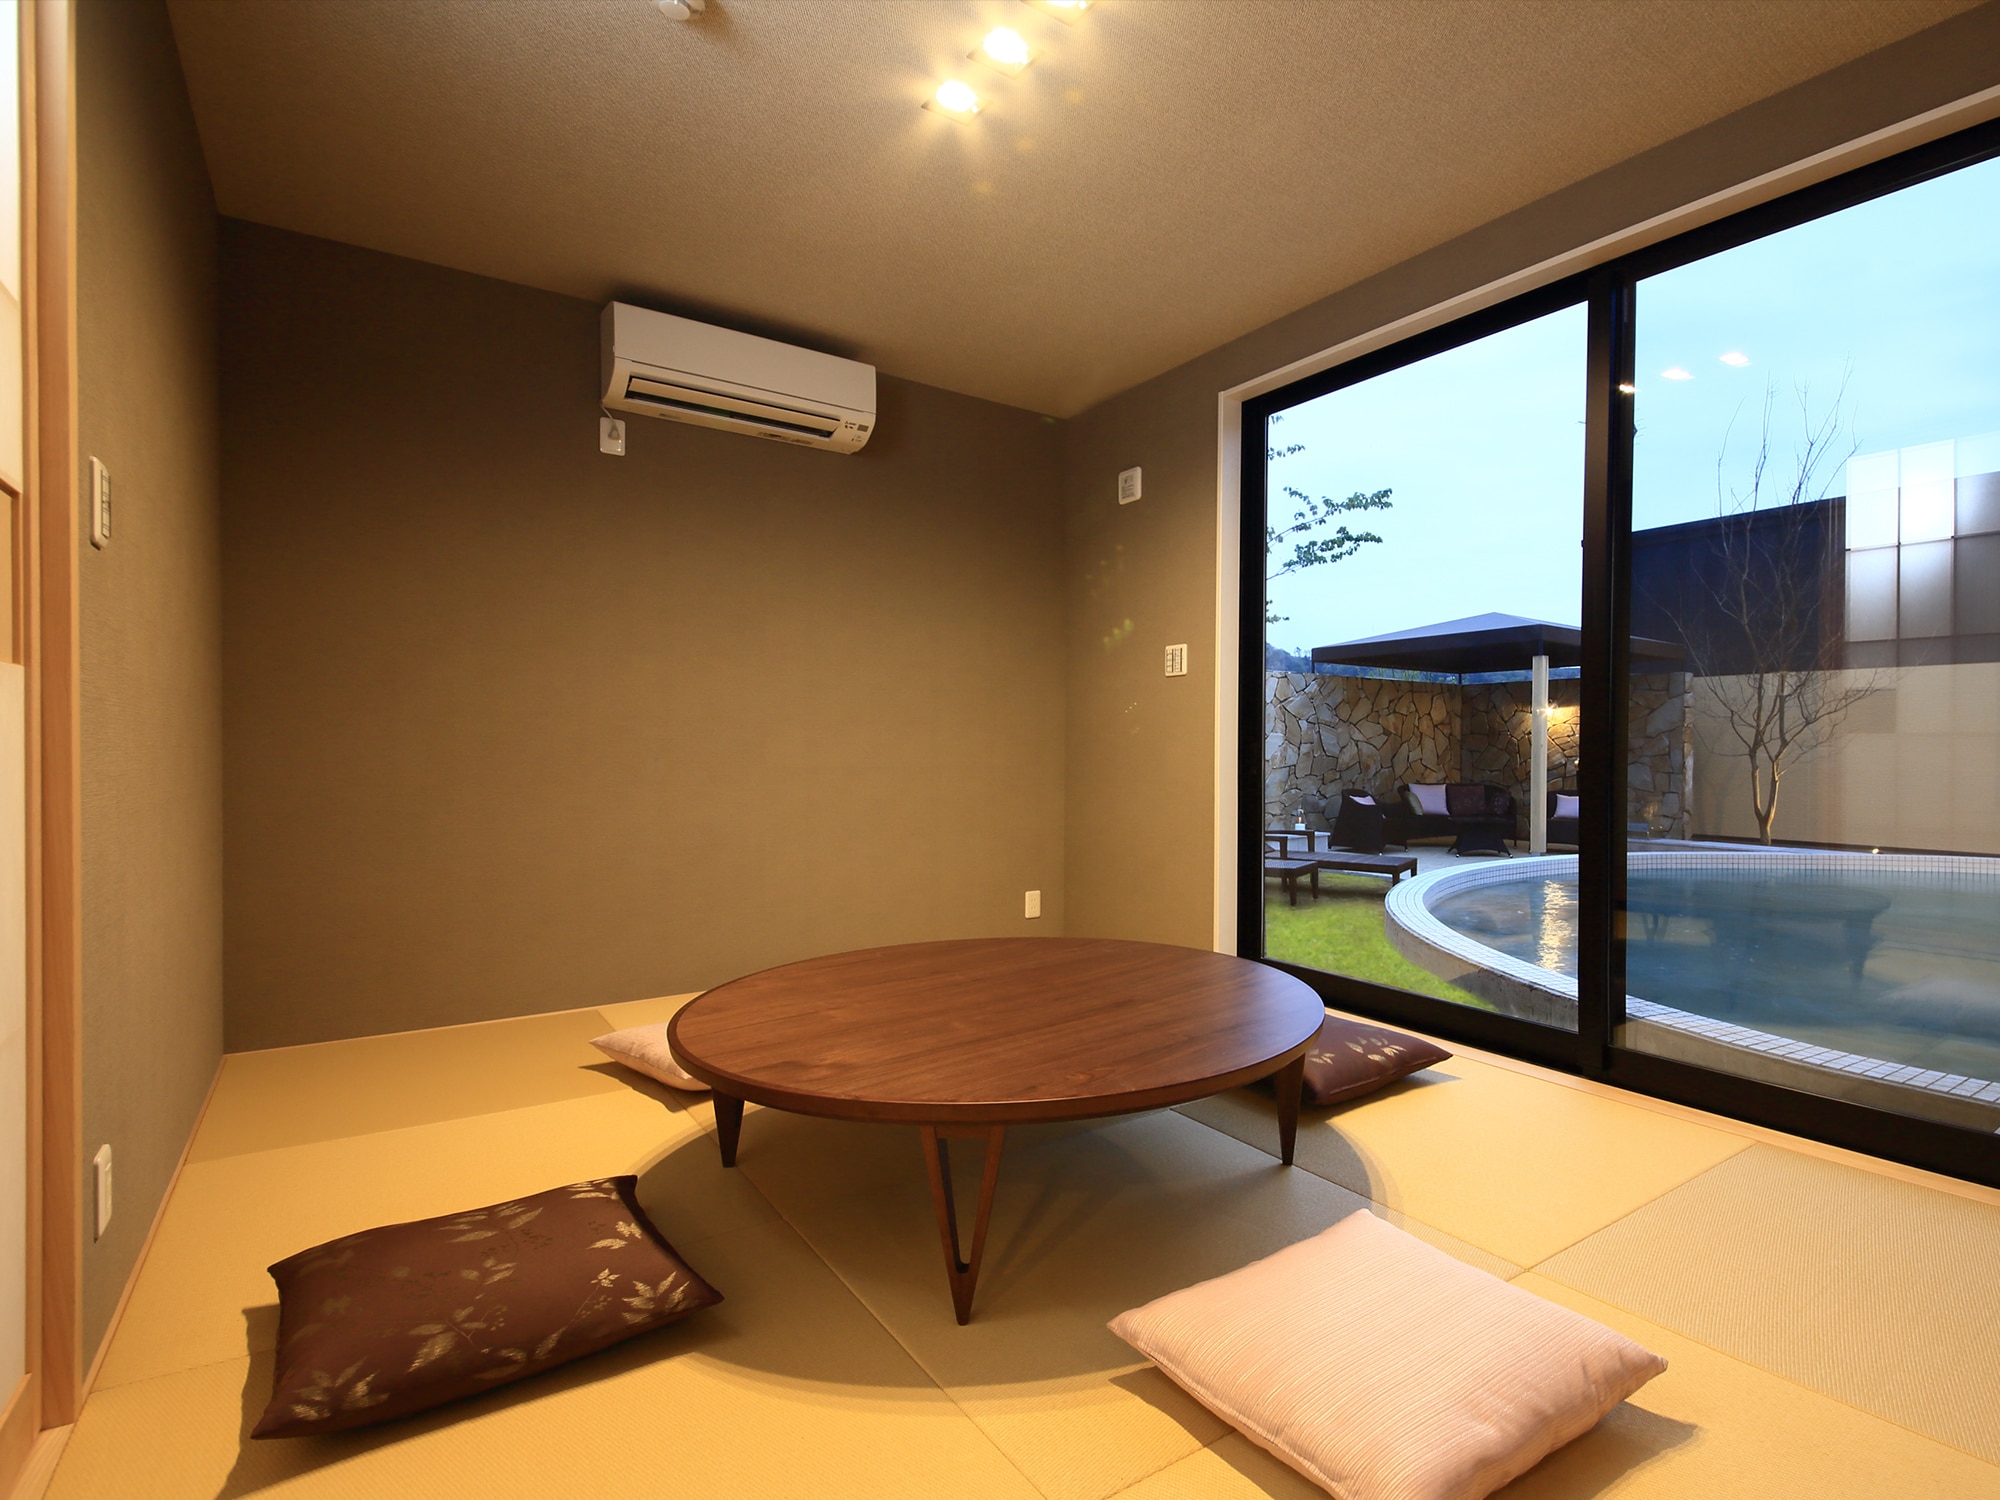 [Japanese-style room] "Lie down on tatami mats and take a nap & hellip;" A relaxing and relaxing space